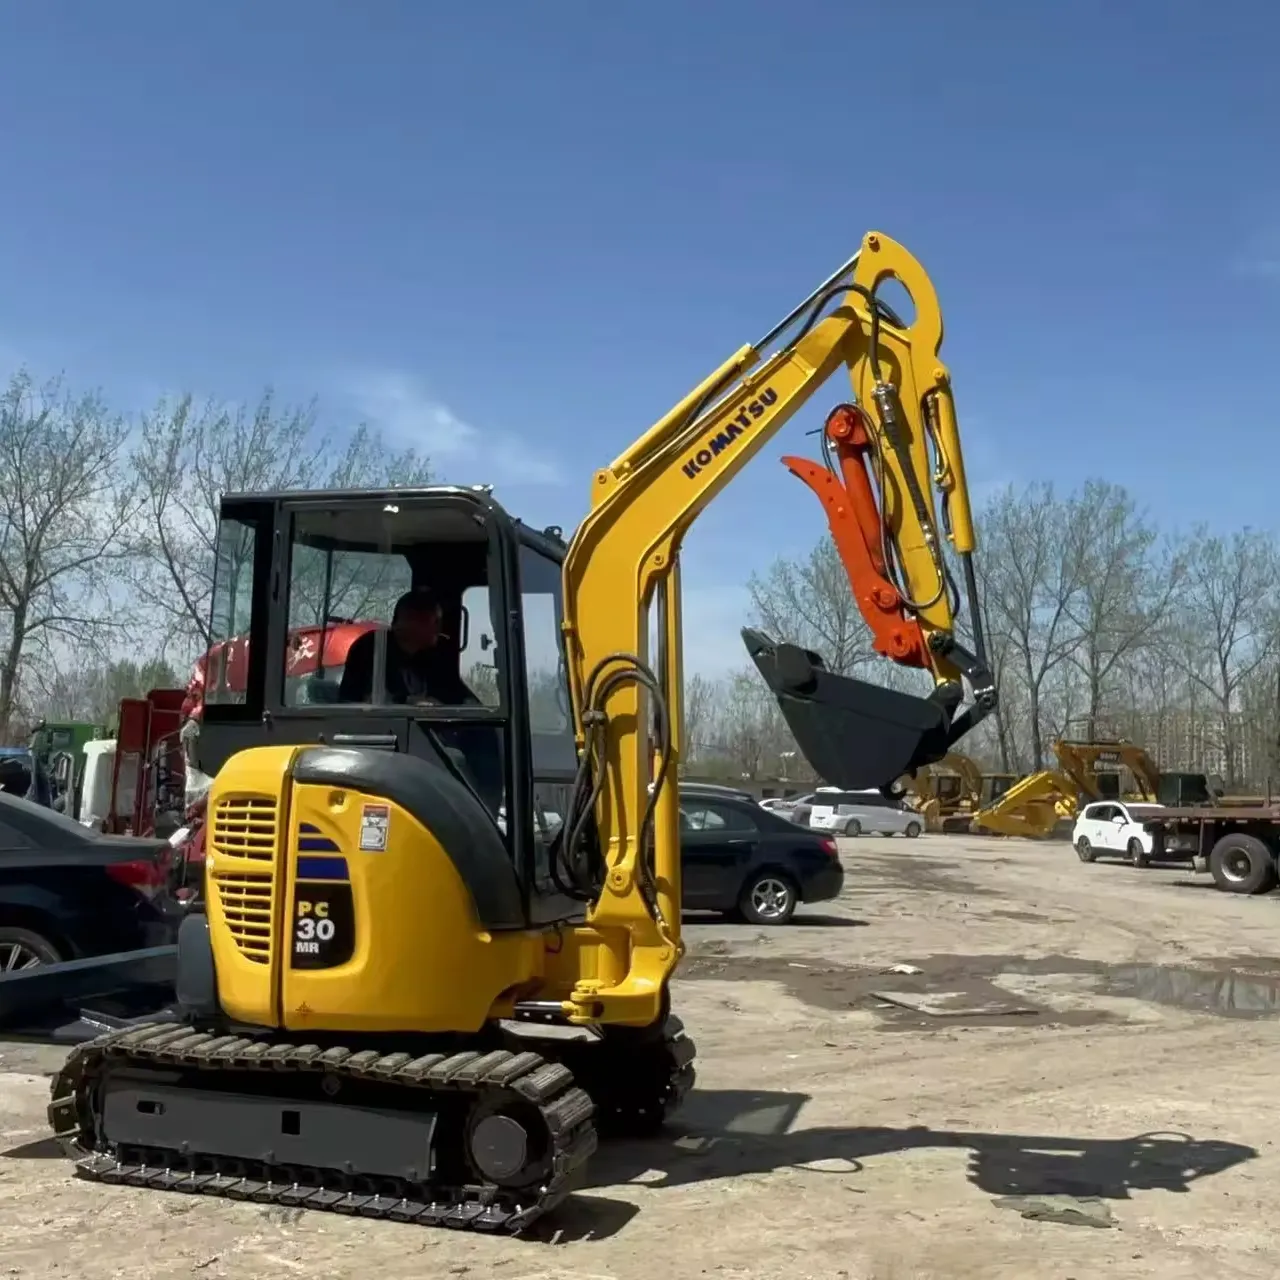 Cheap price used Komatsu pc30 small excavator in good condition on hot sale